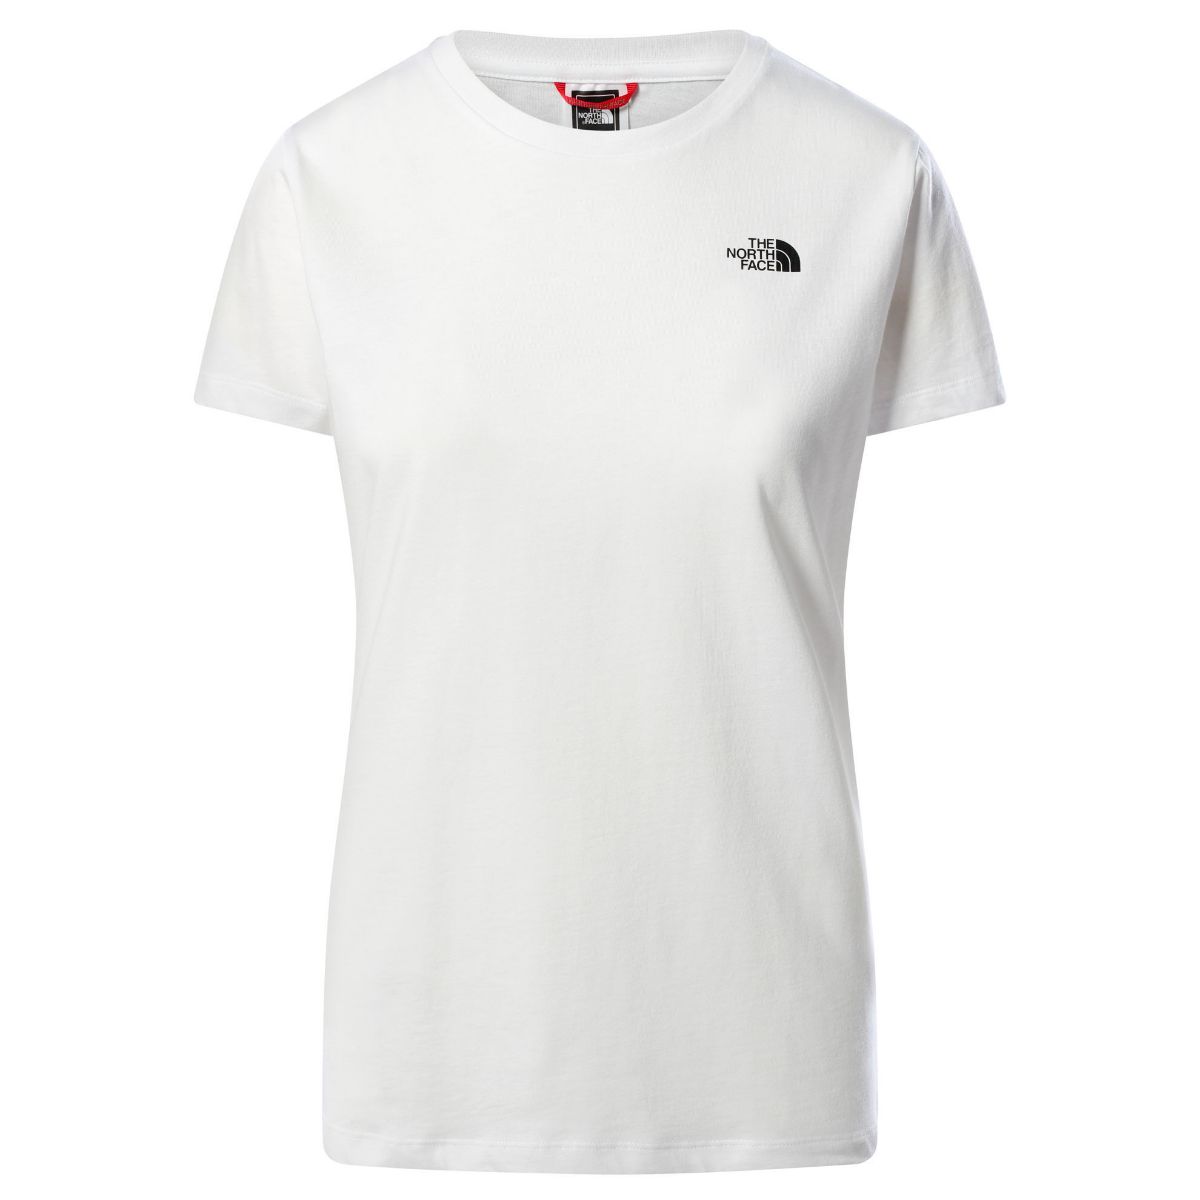 Bilde av The North Face W s/s Simple Dome Tee, White NF0A4T1AFN41